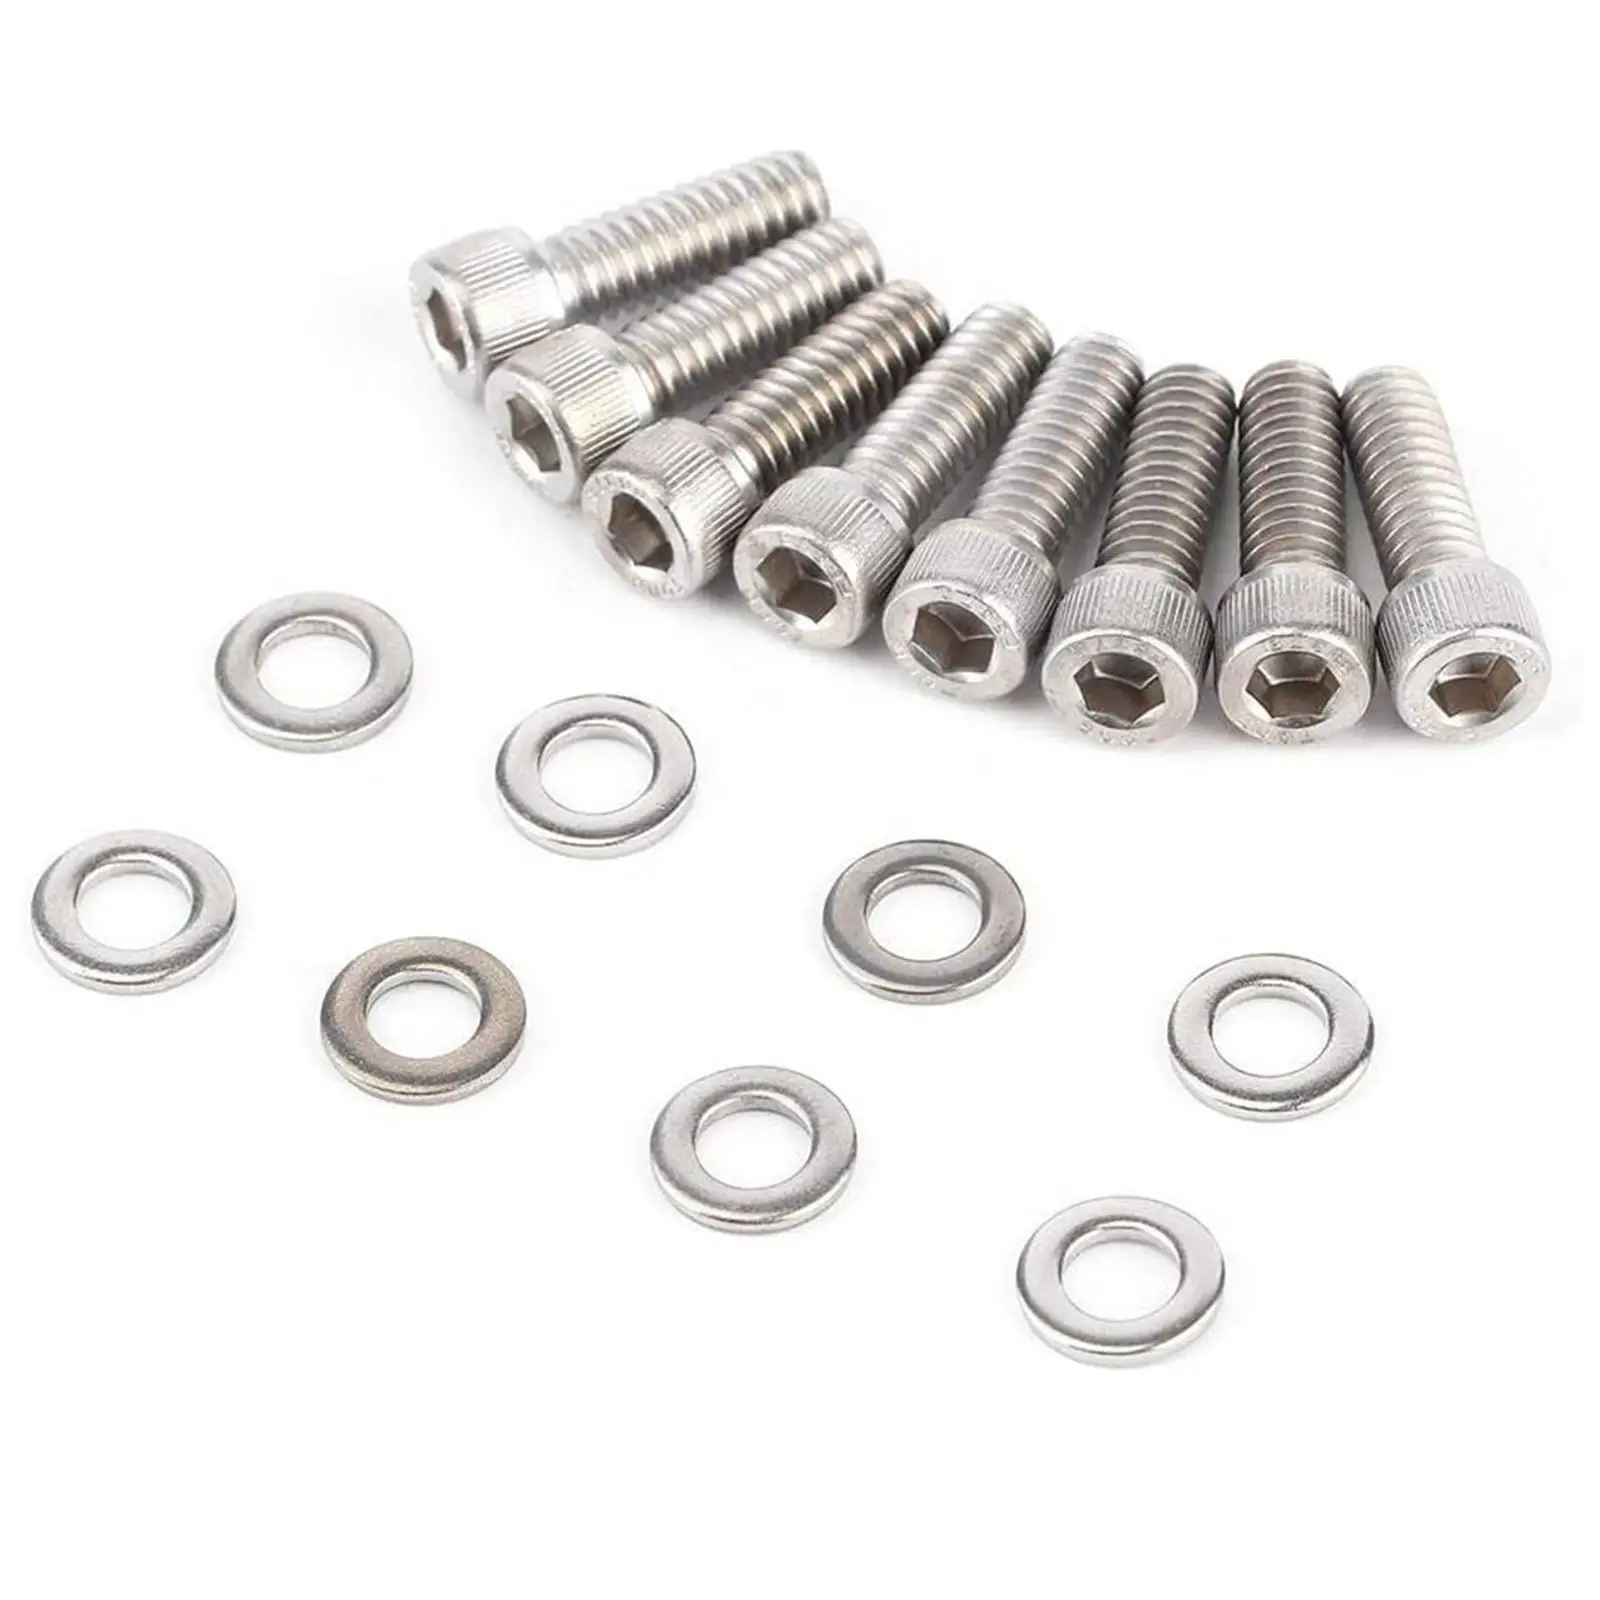 Sbc Cover Bolts Replacement Automotive Fit for  